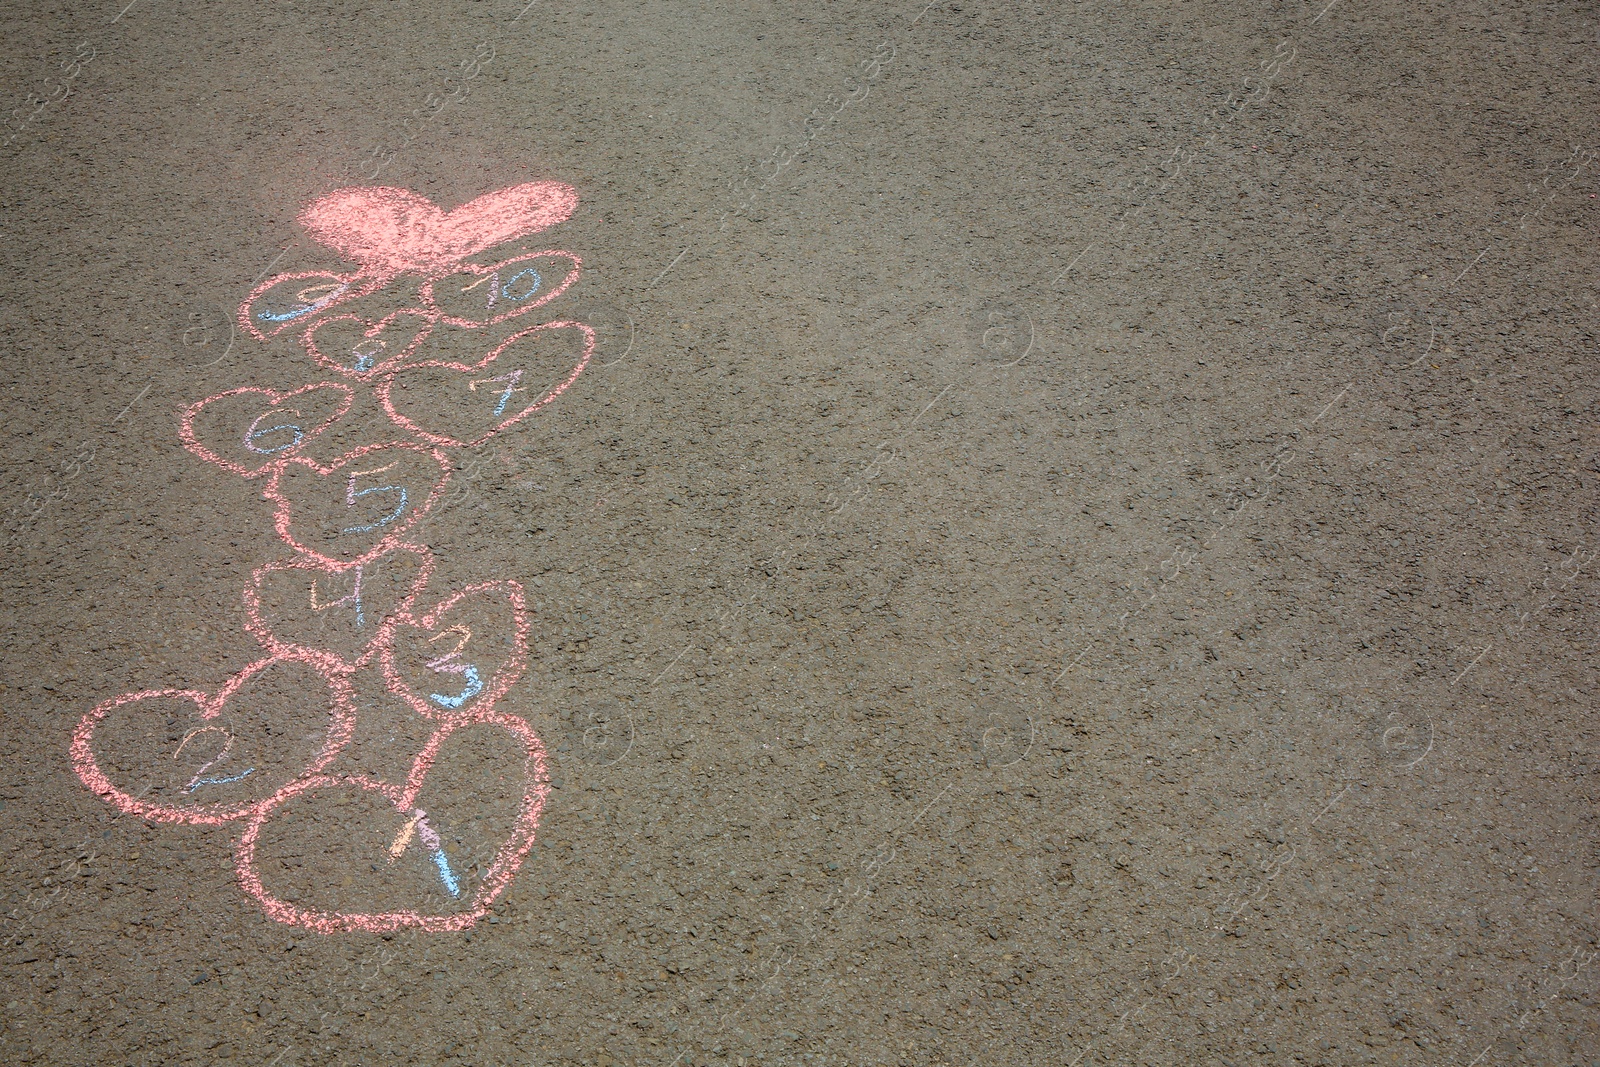 Photo of Hopscotch drawn with colorful chalk on asphalt outdoors. Space for text